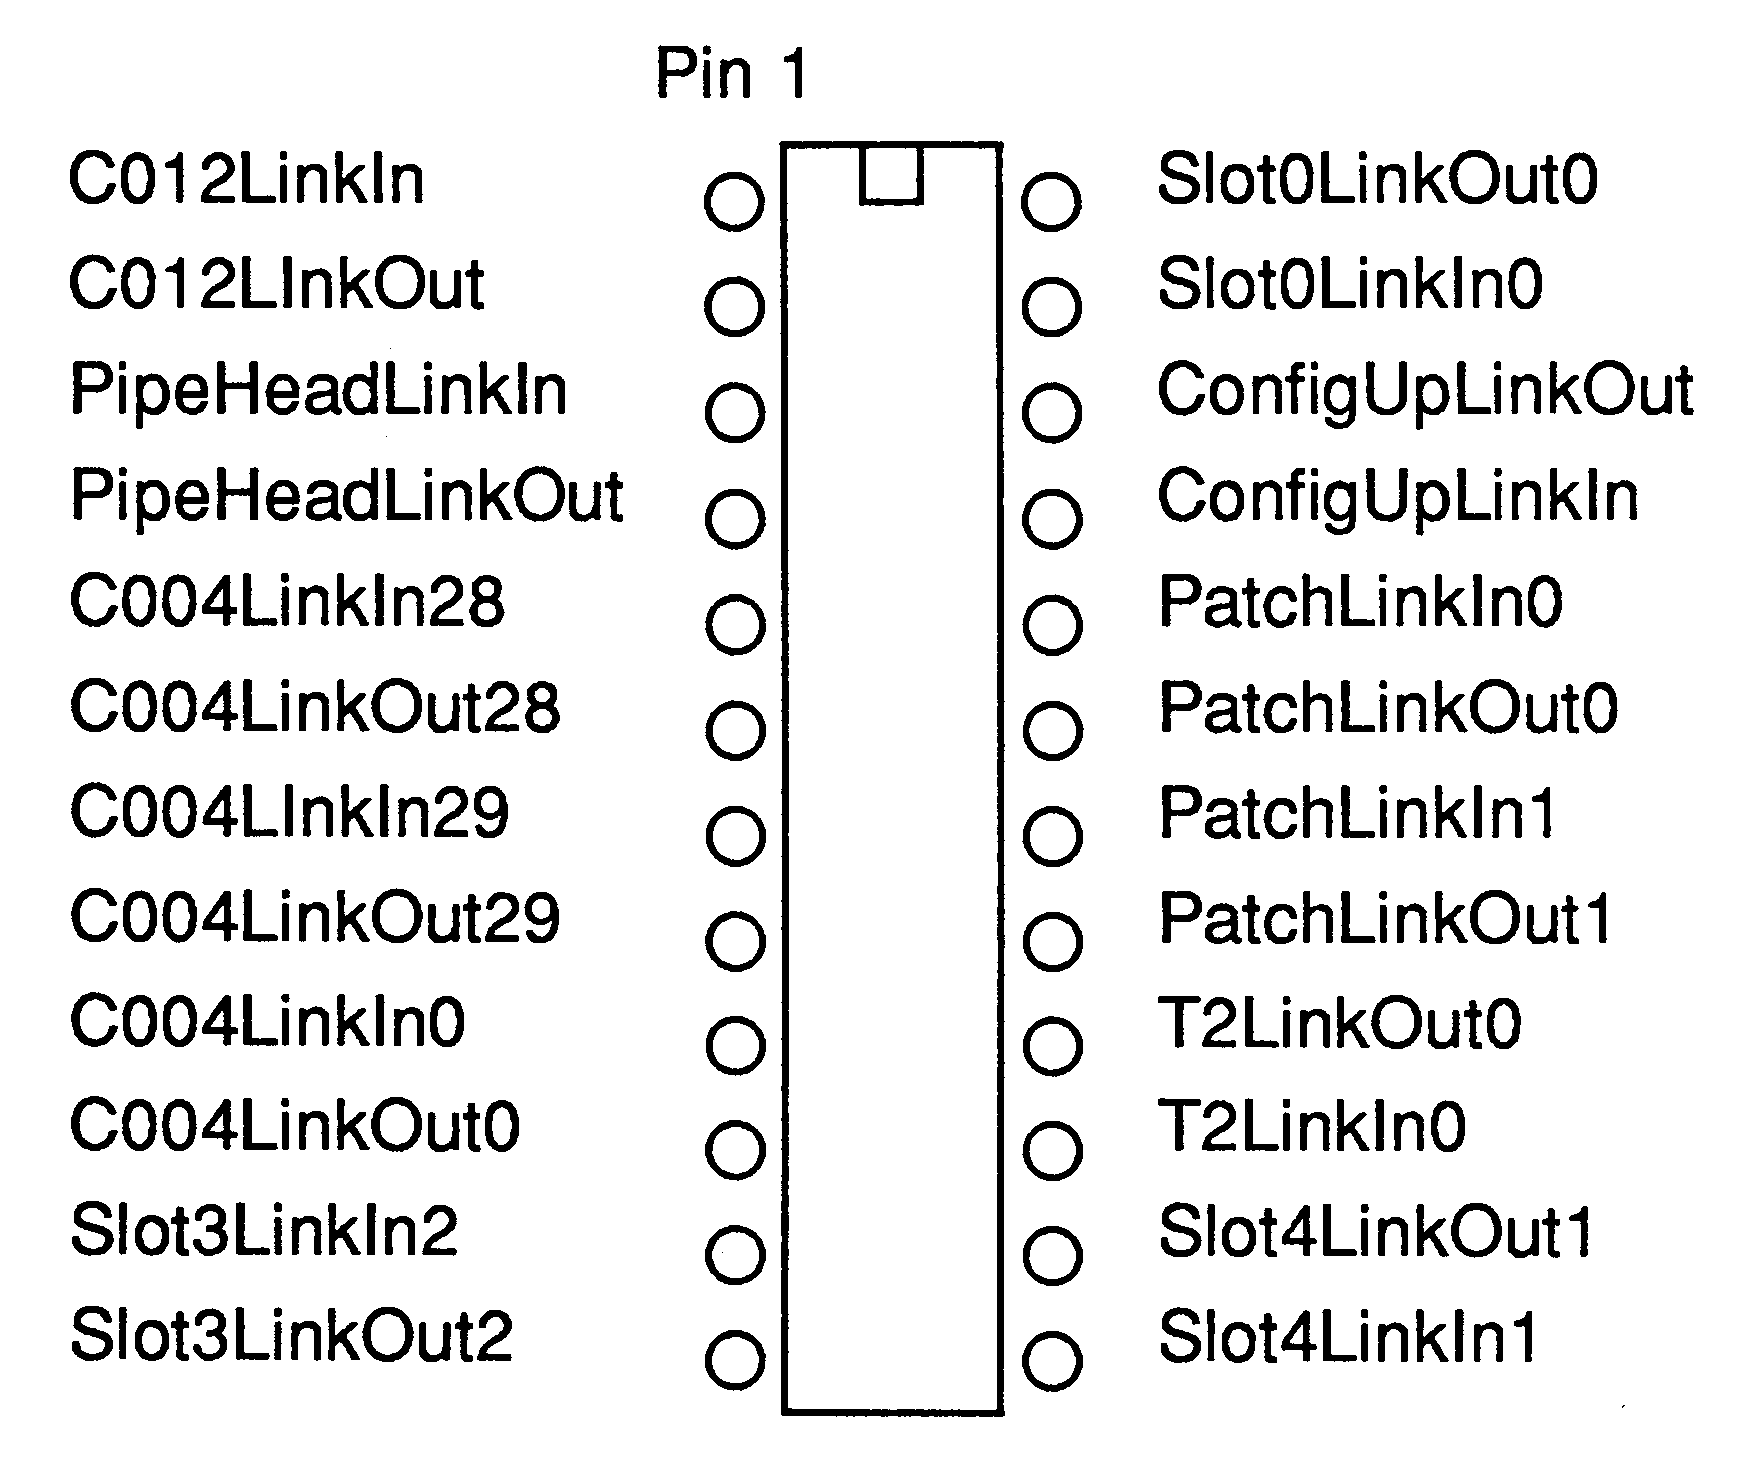 Link
connections made when jumpers are installed on JP2 and JP3.